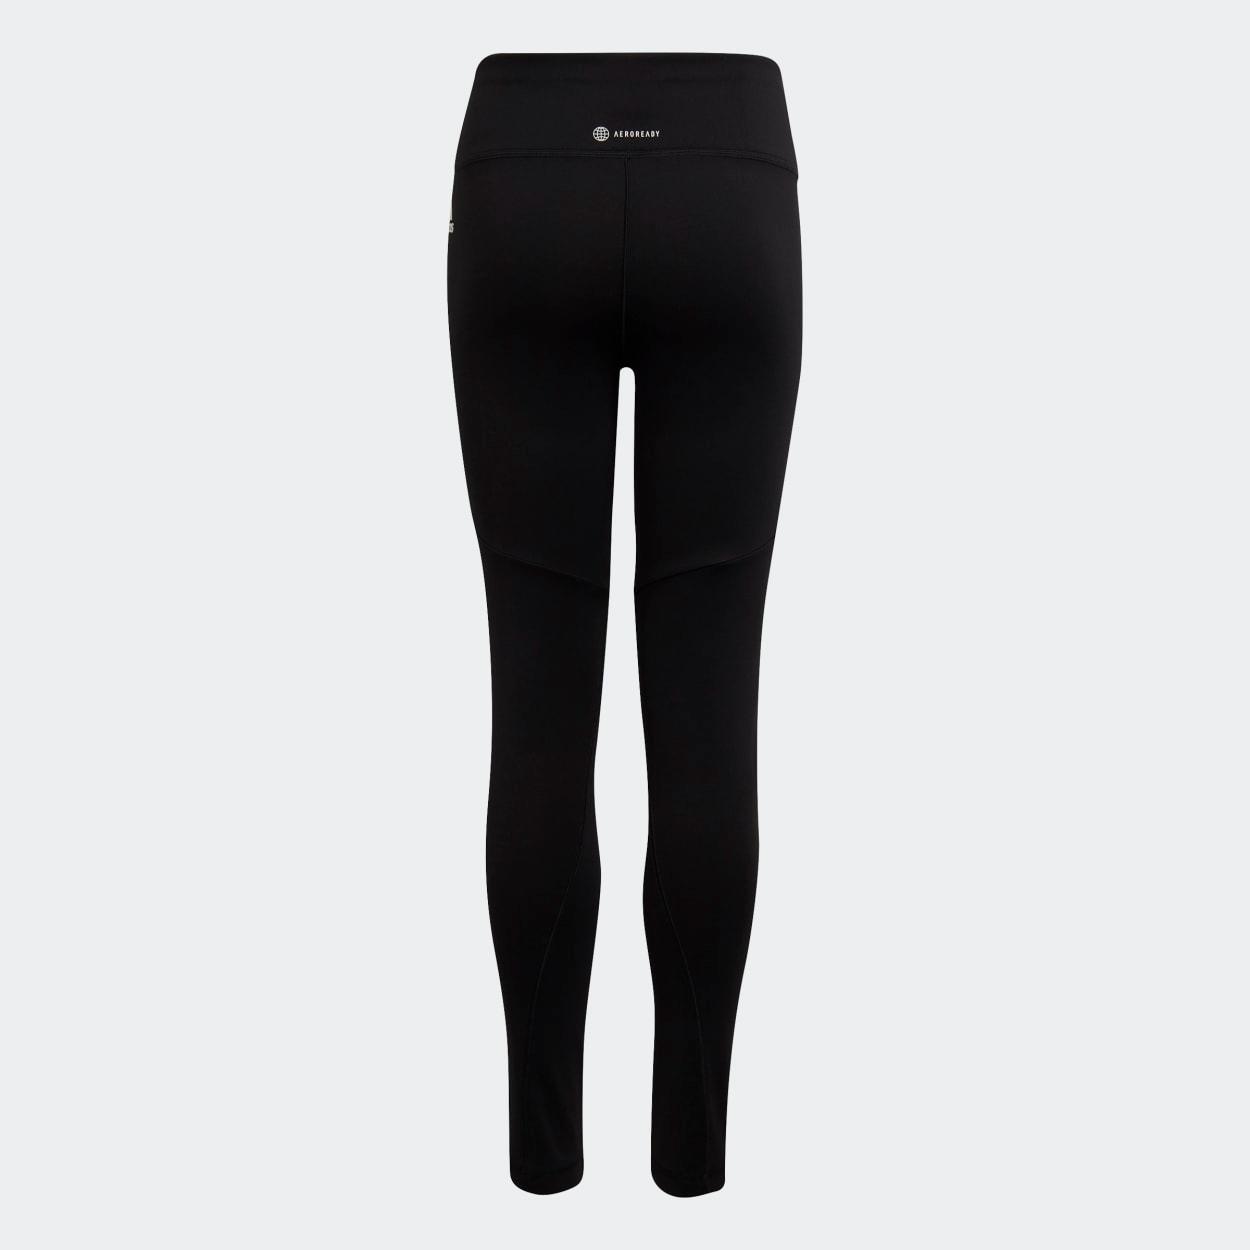 Non-Toxic Leggings without Forever Chemicals